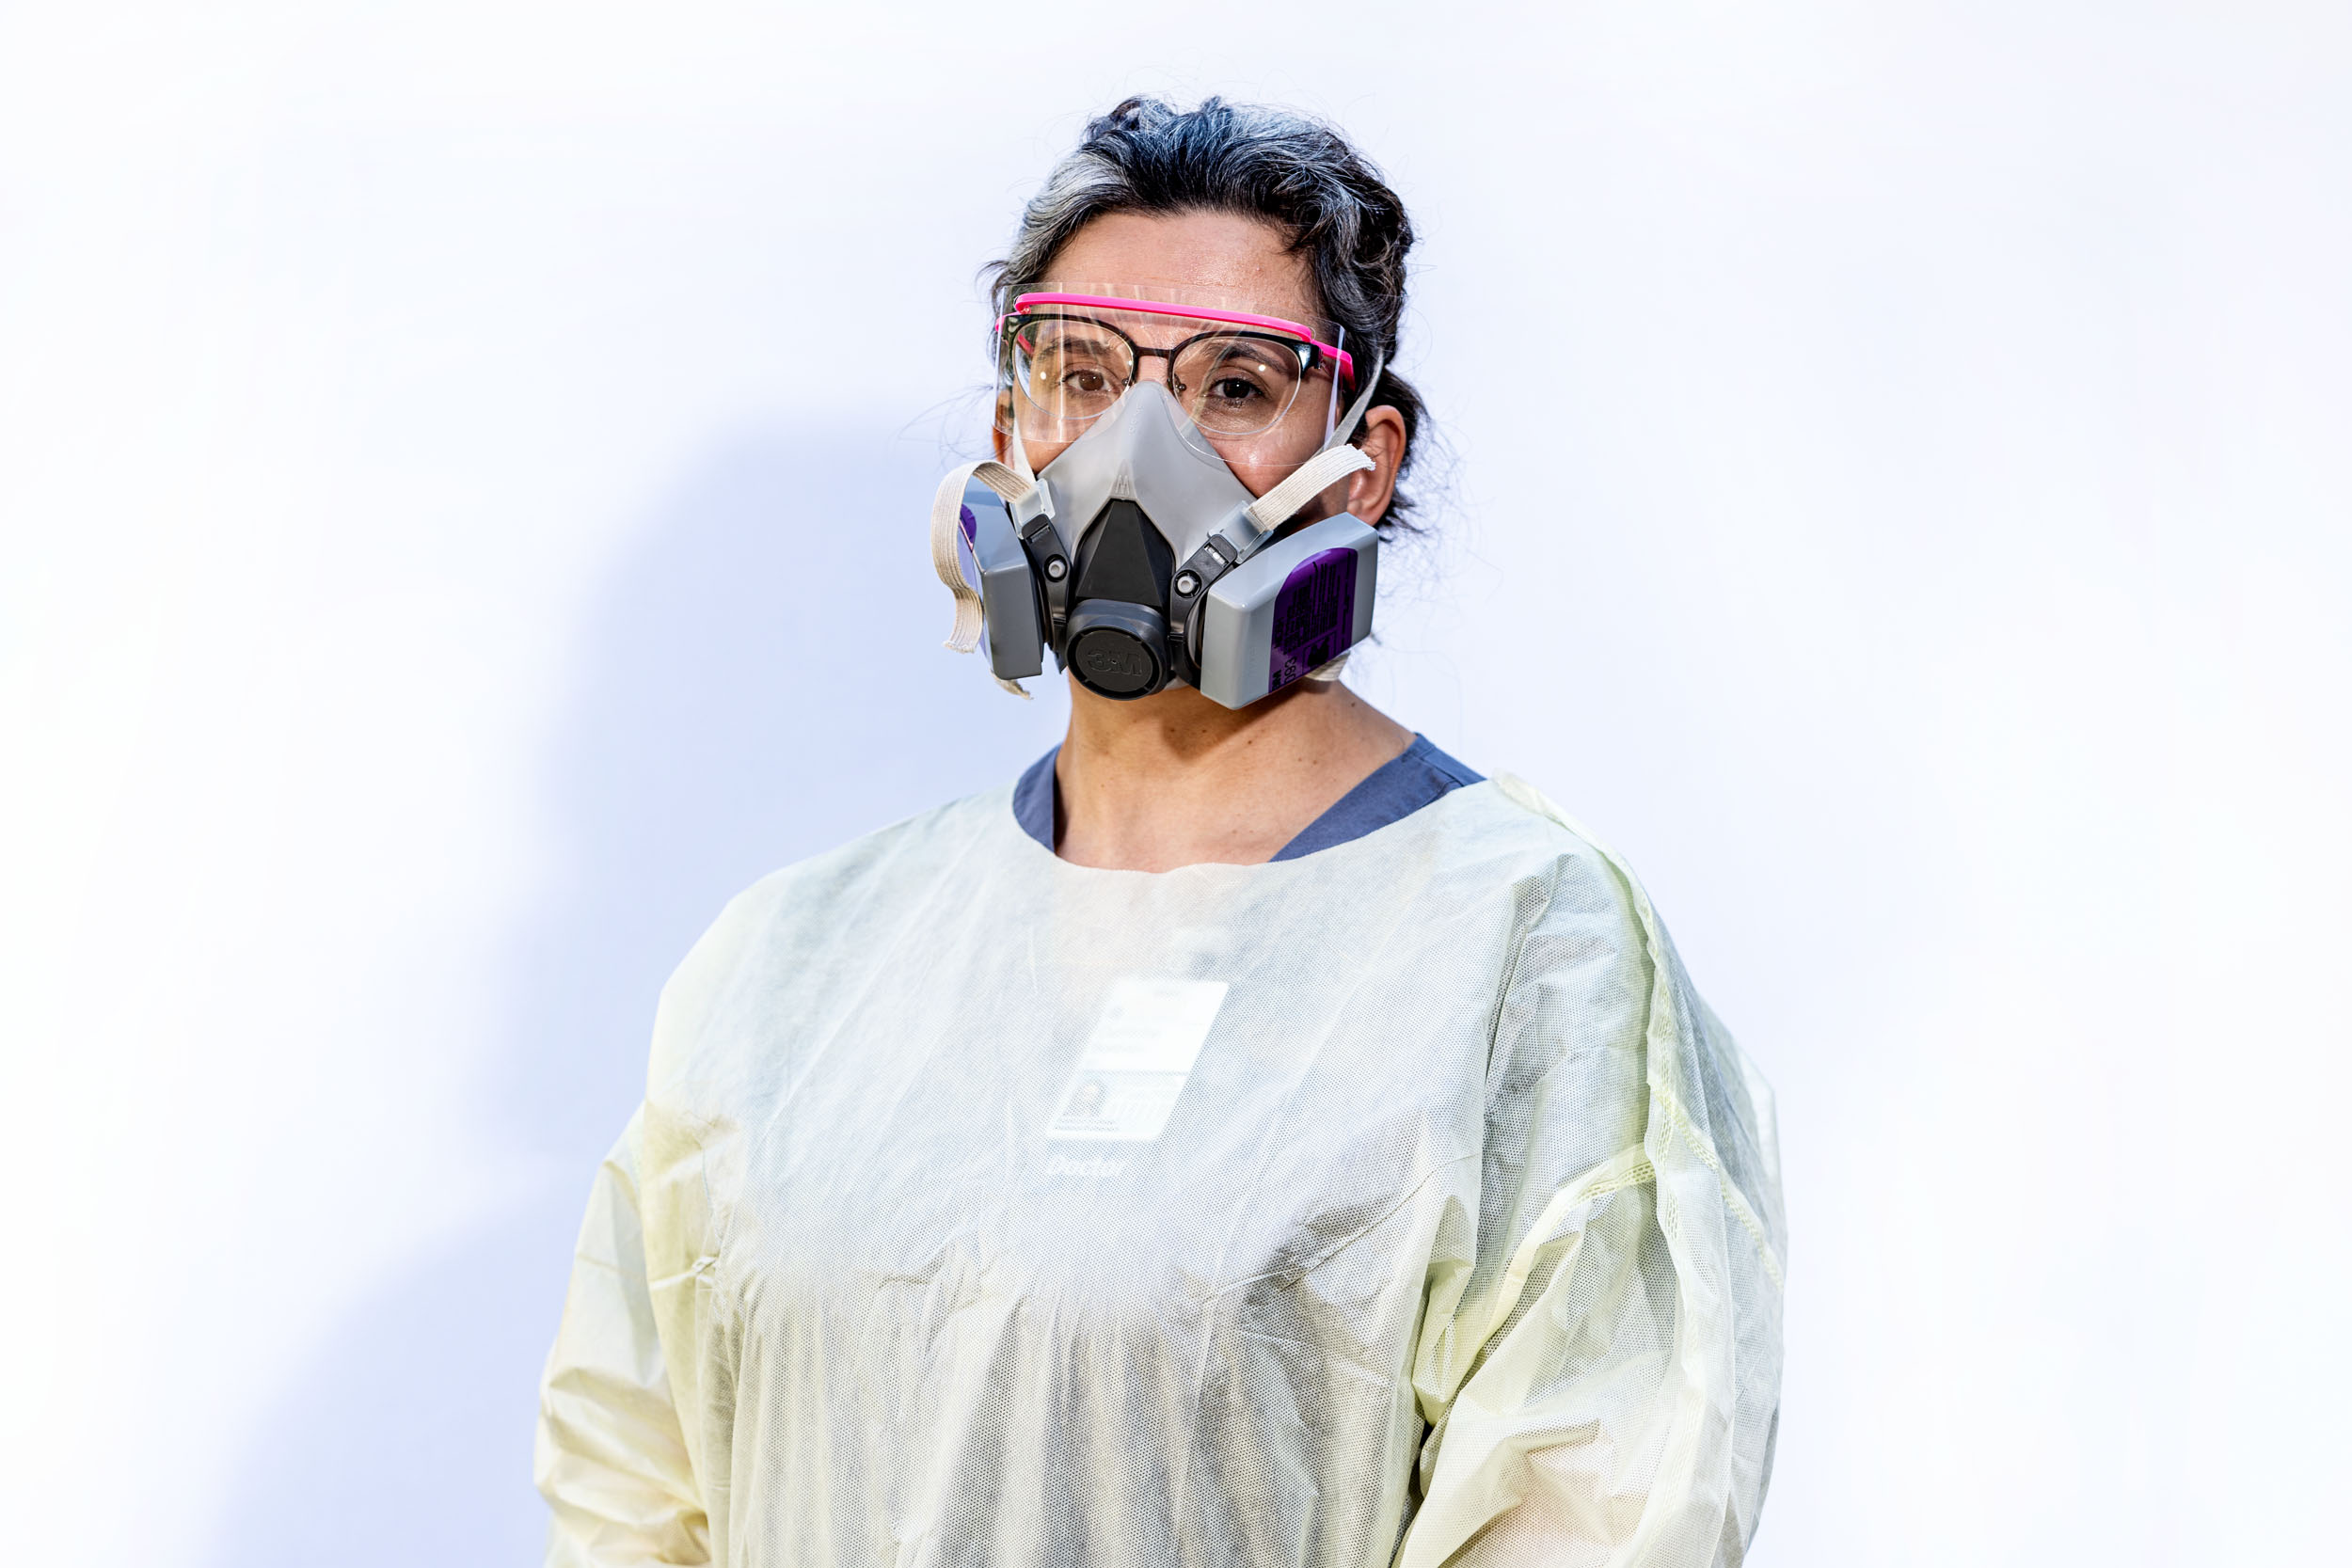 Medical Professional wearing a medical gown, face shield, and gas mask